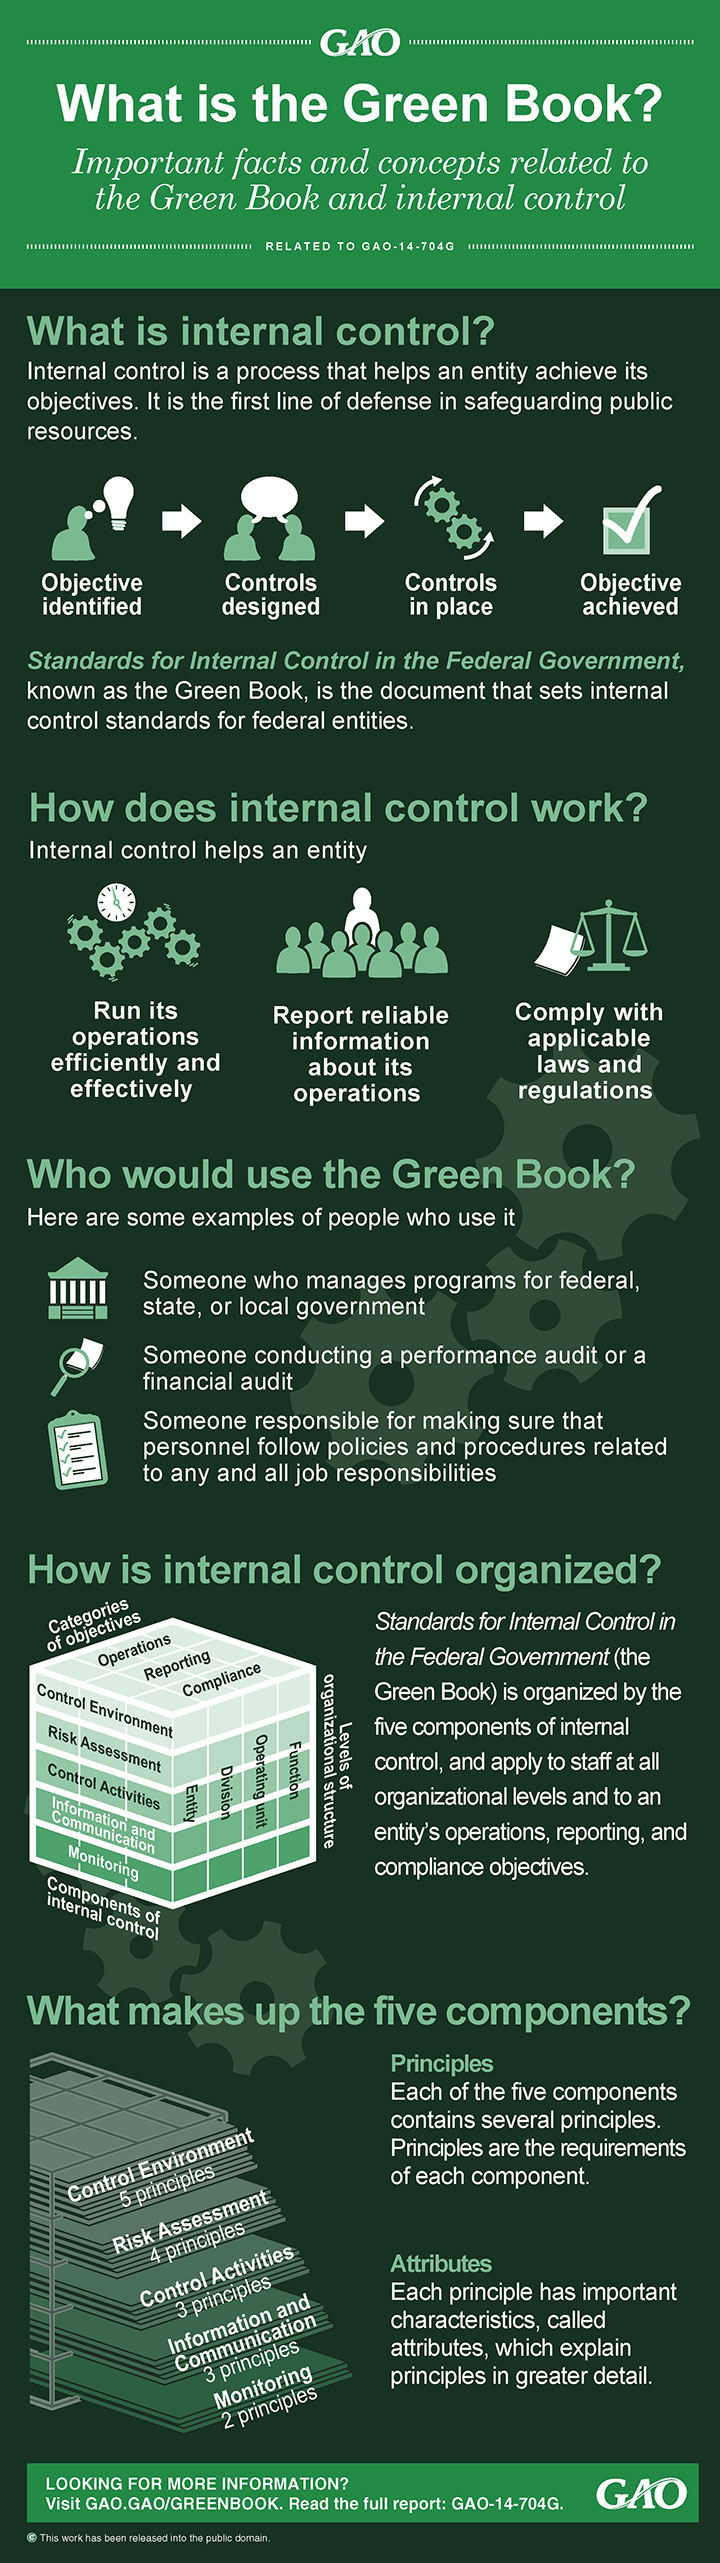 Infographic about the Green Book